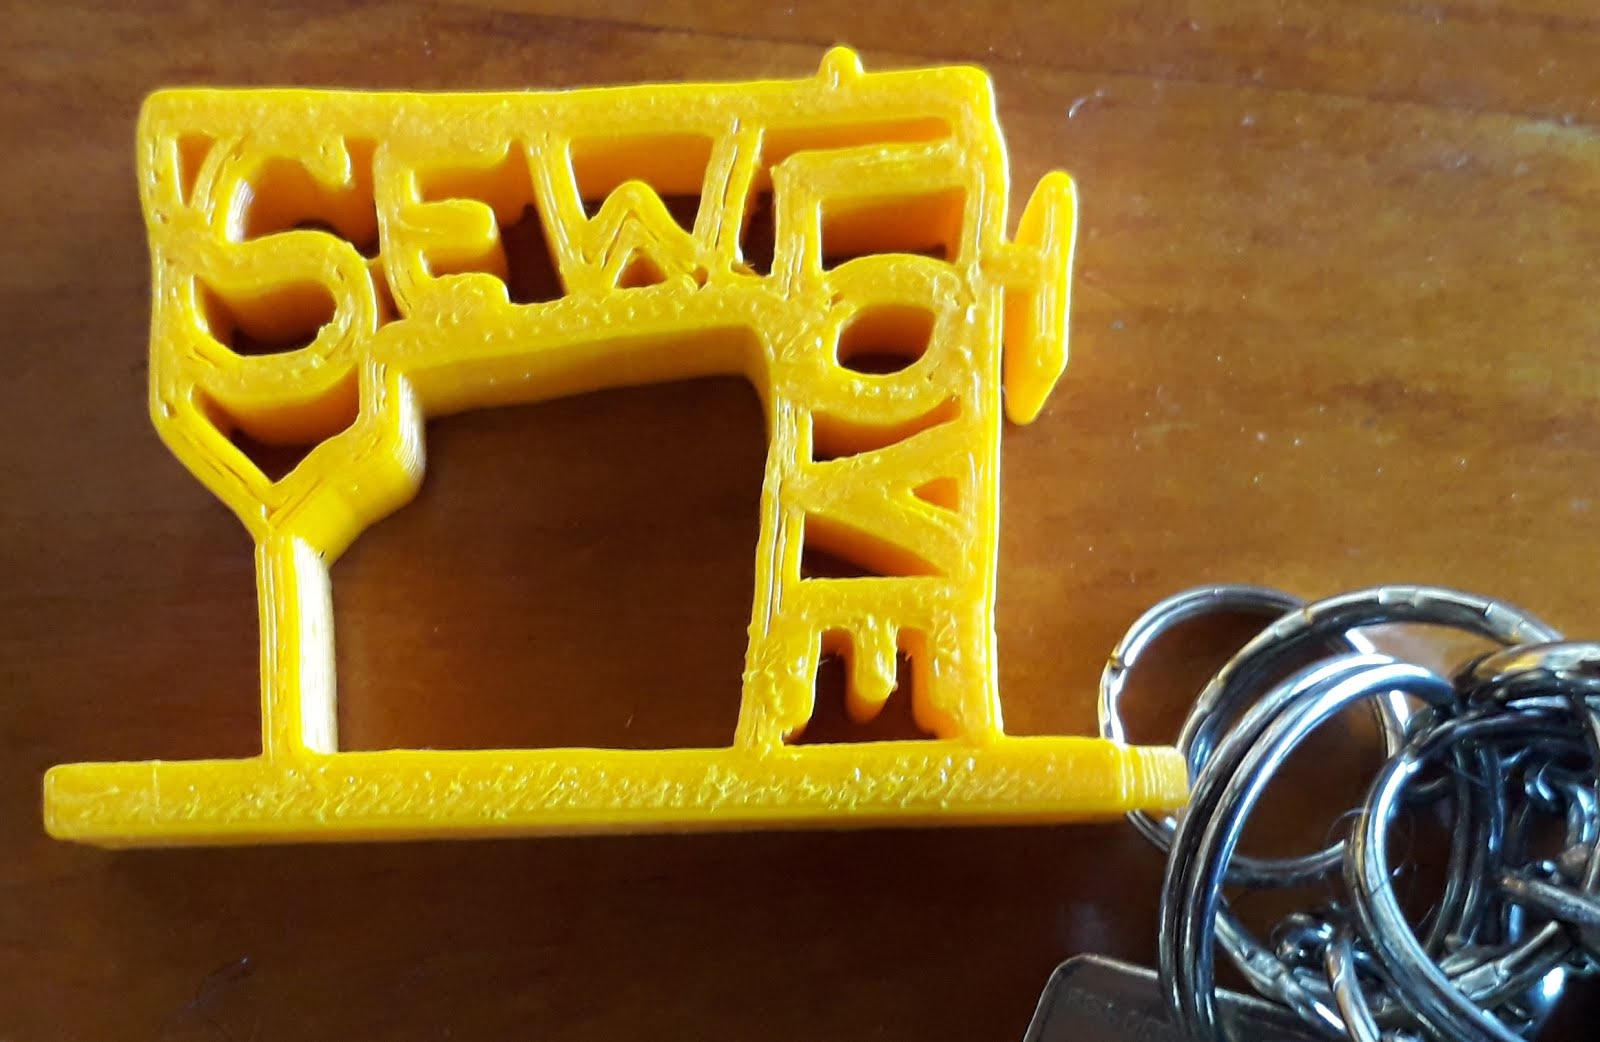 Delightful 3D printed key ring pressie from a friend and colleague who is off to a new job.